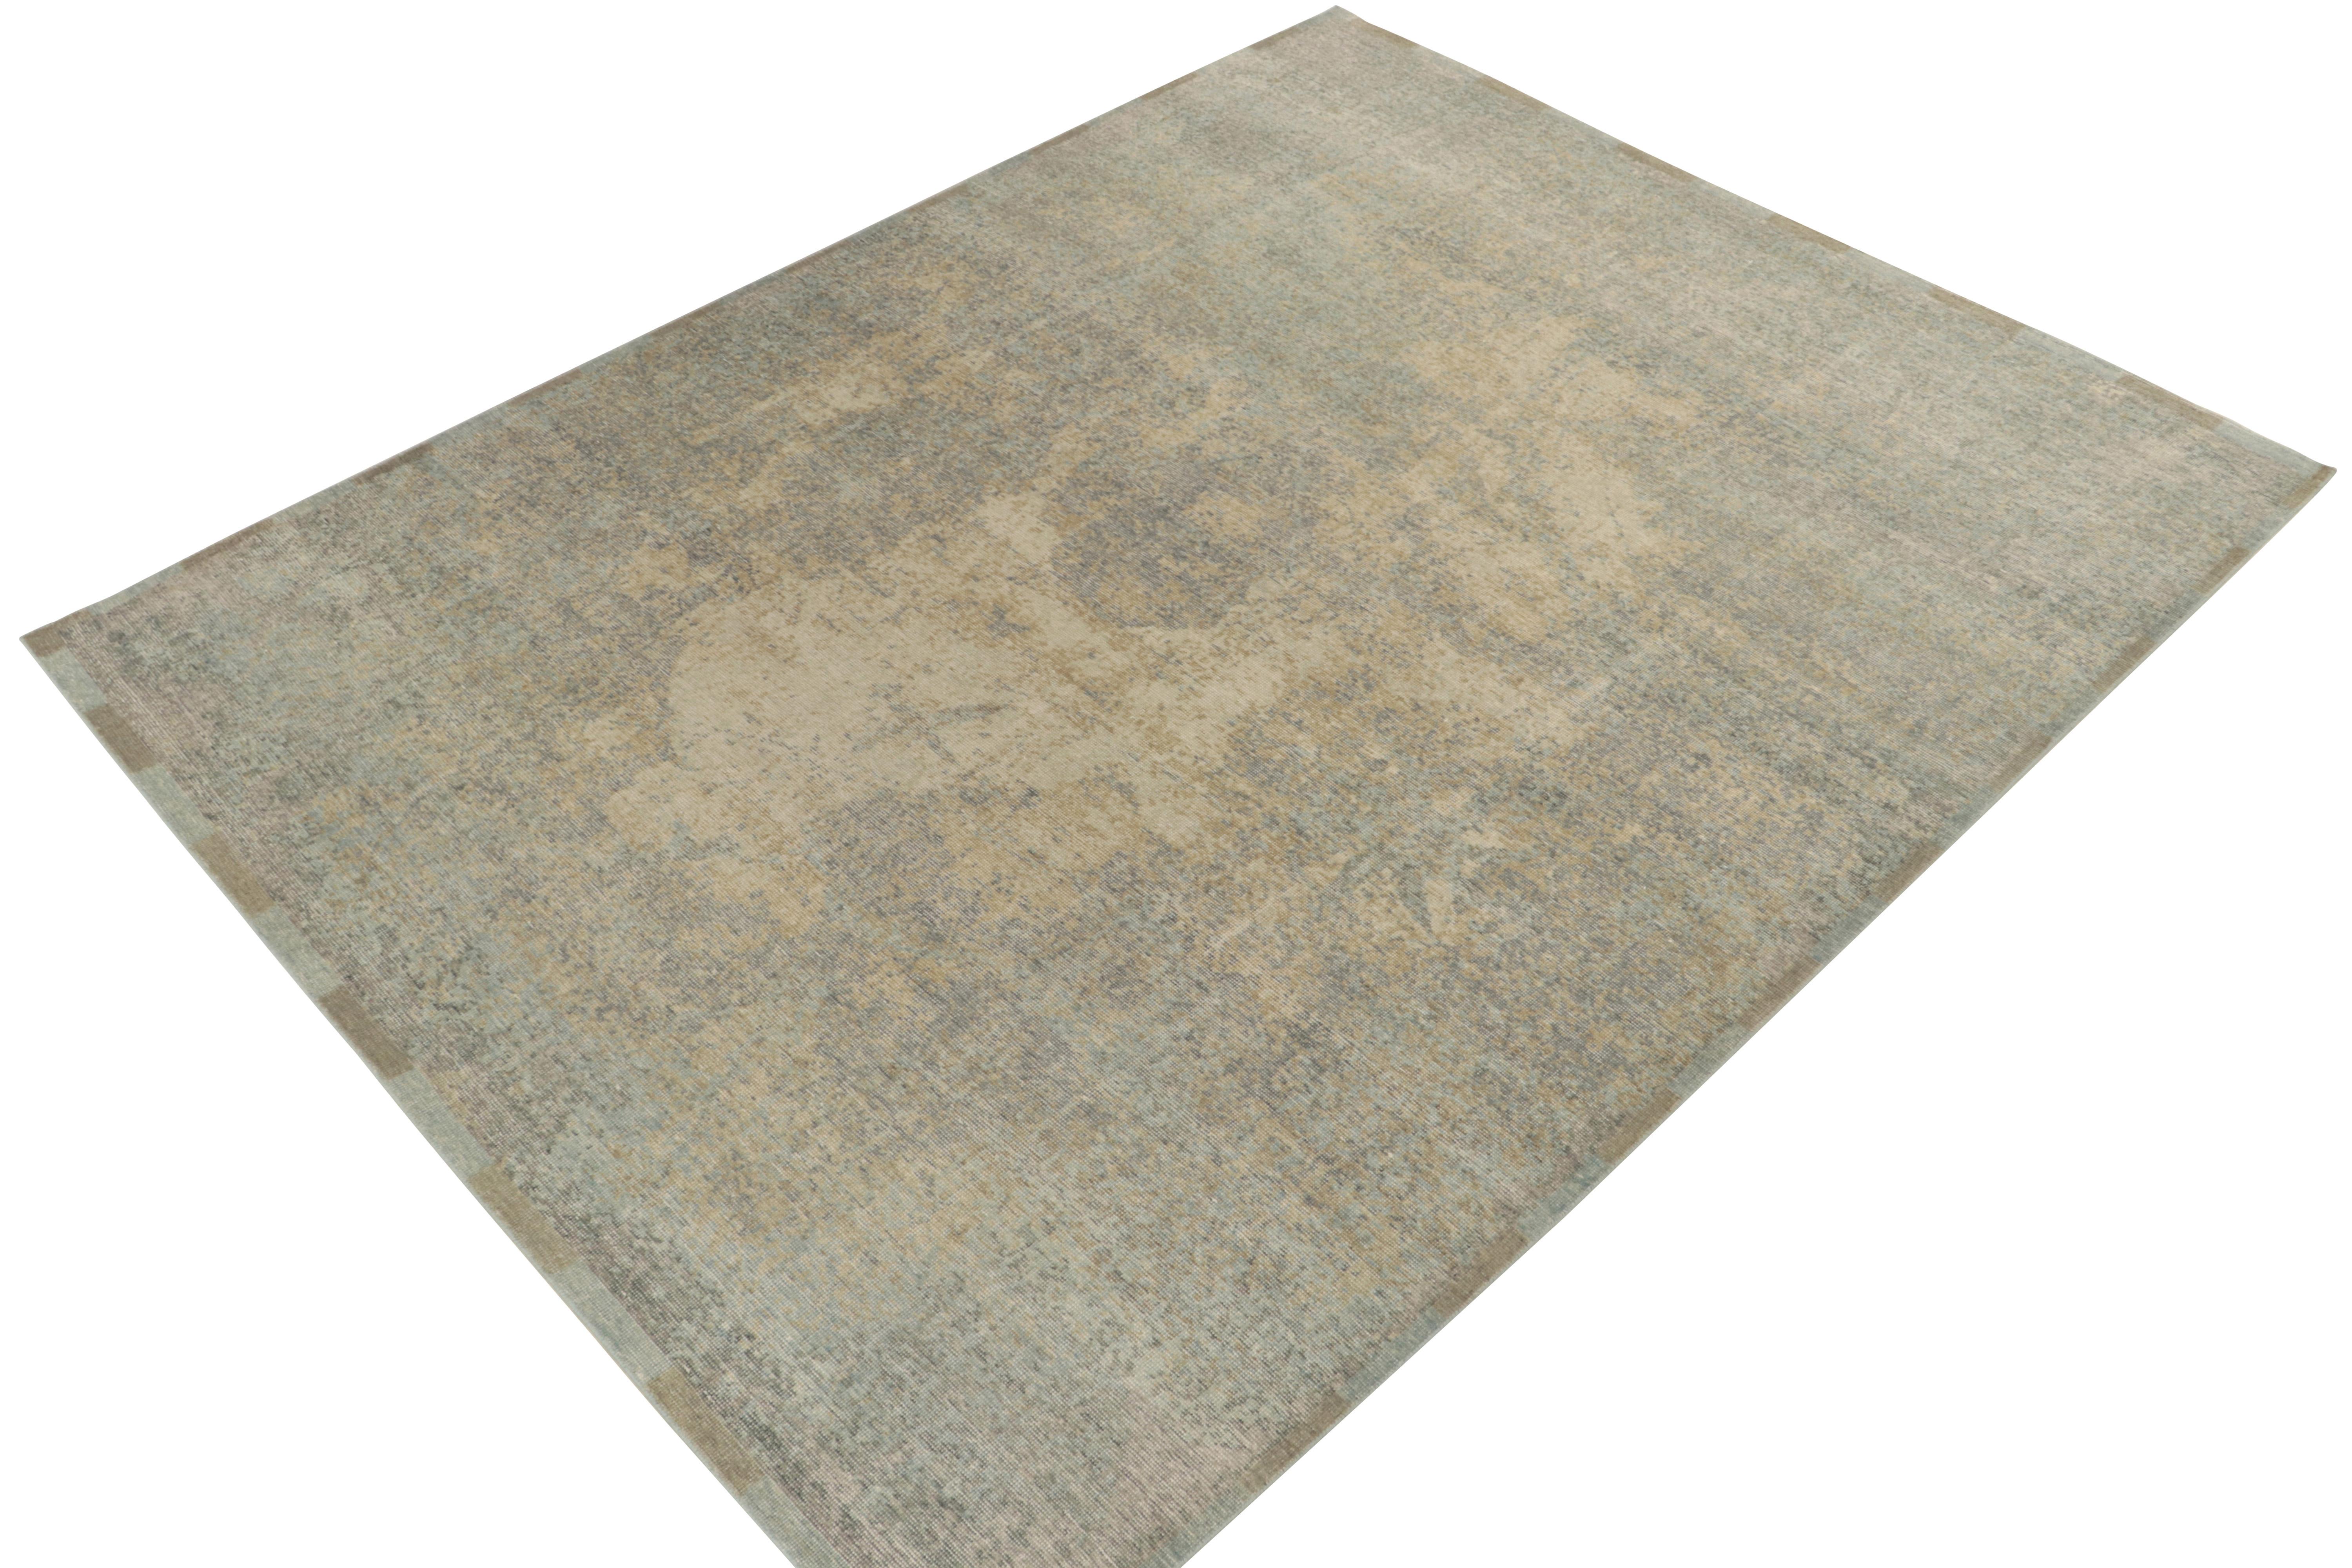 From Rug & Kilim’s Homage collection, a 9x12 distressed style abstract rug relishing a smart play of luscious beige, blue & gold for an alluring take on this textural style. Exemplifying the easy to maintain, comfortable wash achieving this textured